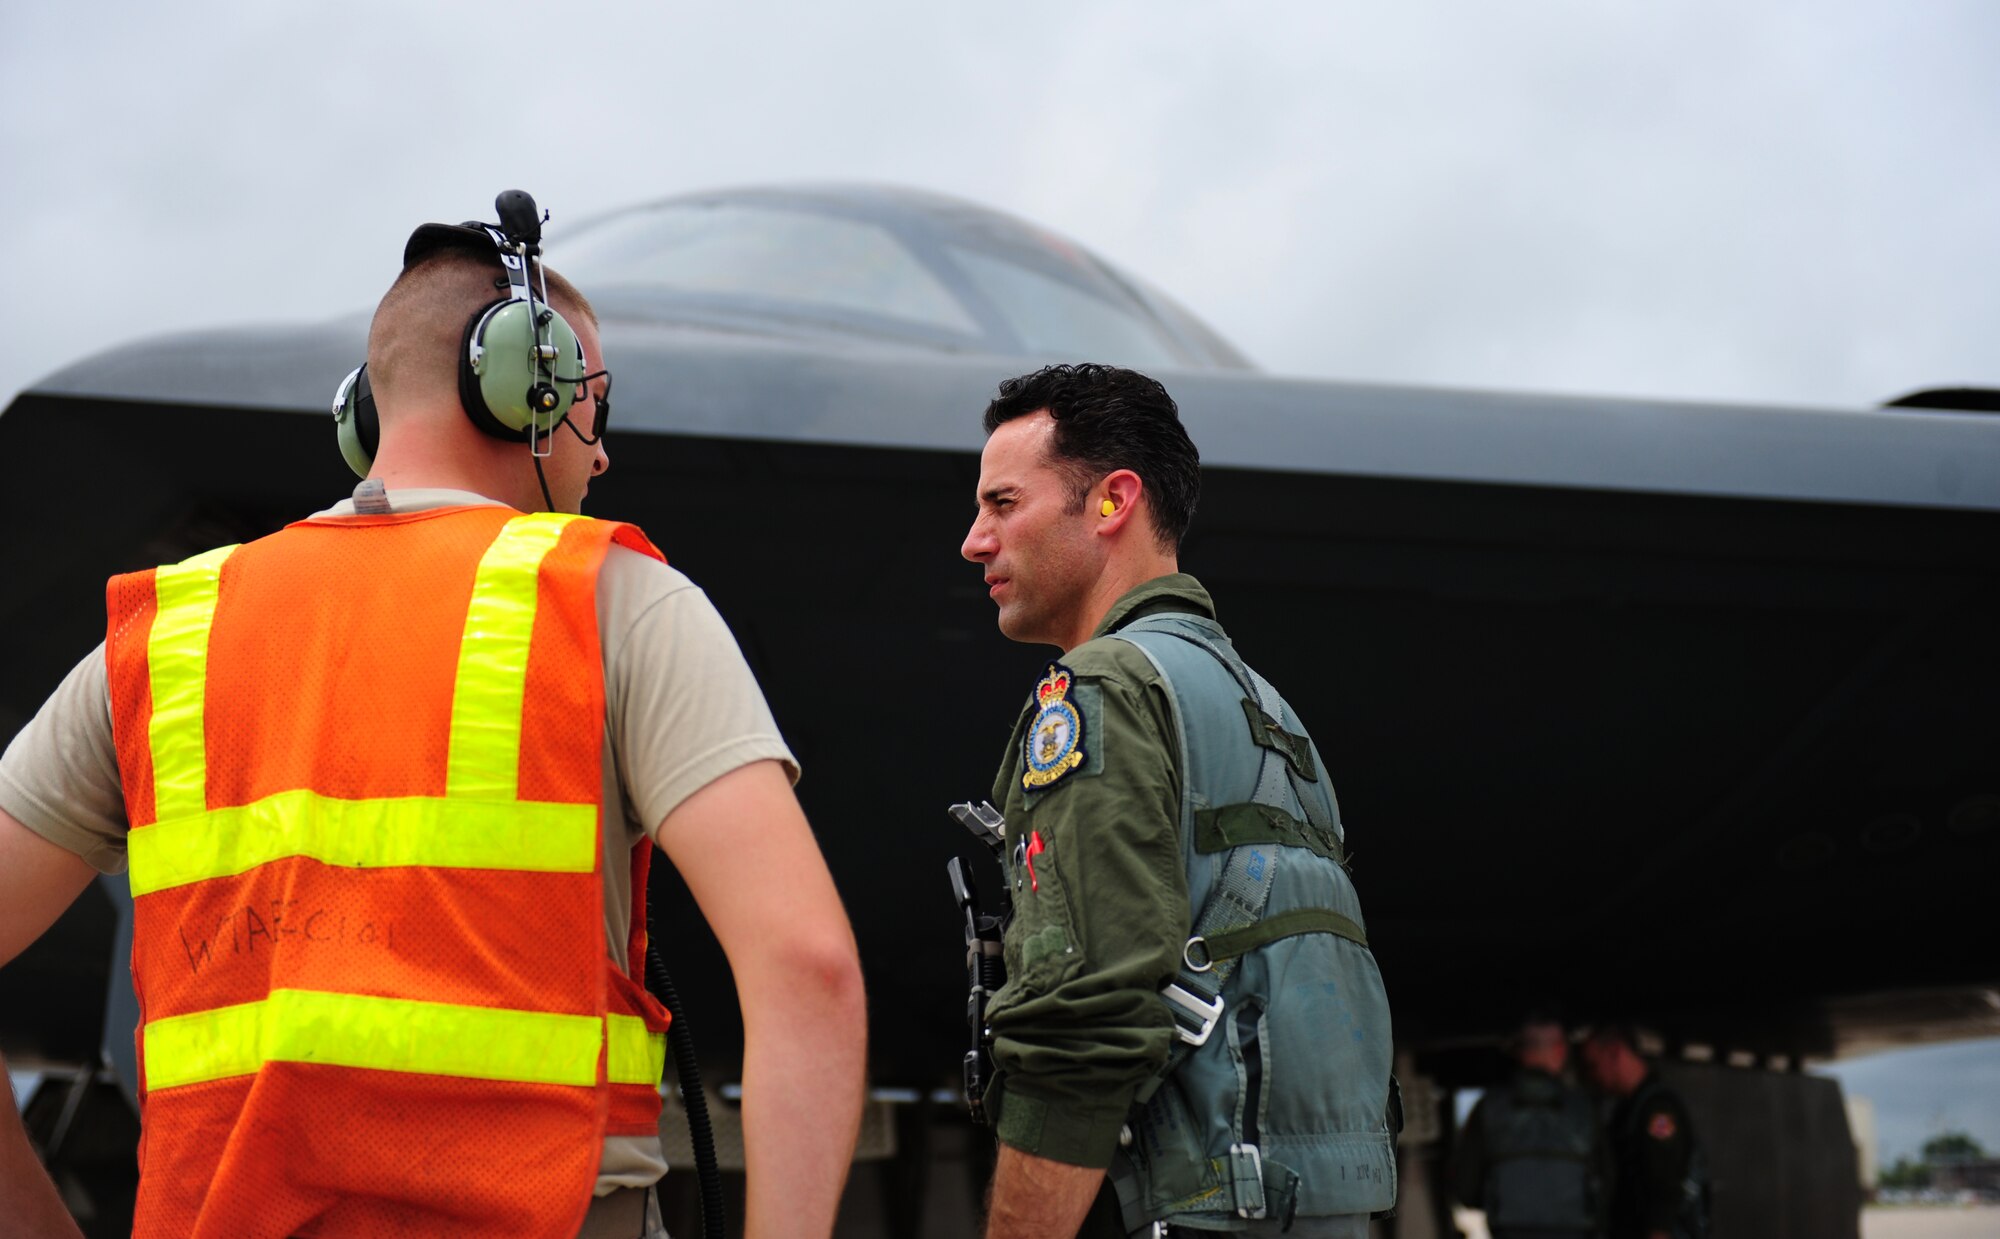 Tech. Sgt. Andrew Jones, 509th Aircraft Maintenance Squadron dedicated crew chief, shares some words with a fellow crew chief just before boarding a B-2 Spirit at Whiteman Air Force Base, Mo., July 10, 2015. Jones was awarded an incentive flight in the B-2 Spirit for being named the 2013 Air Force Global Strike Command Crew Chief of the Year. Two other Crew Chiefs of the Year were also given incentive flights the same day. (U.S. Air Force photo by Senior Airman Joel Pfiester/Released)